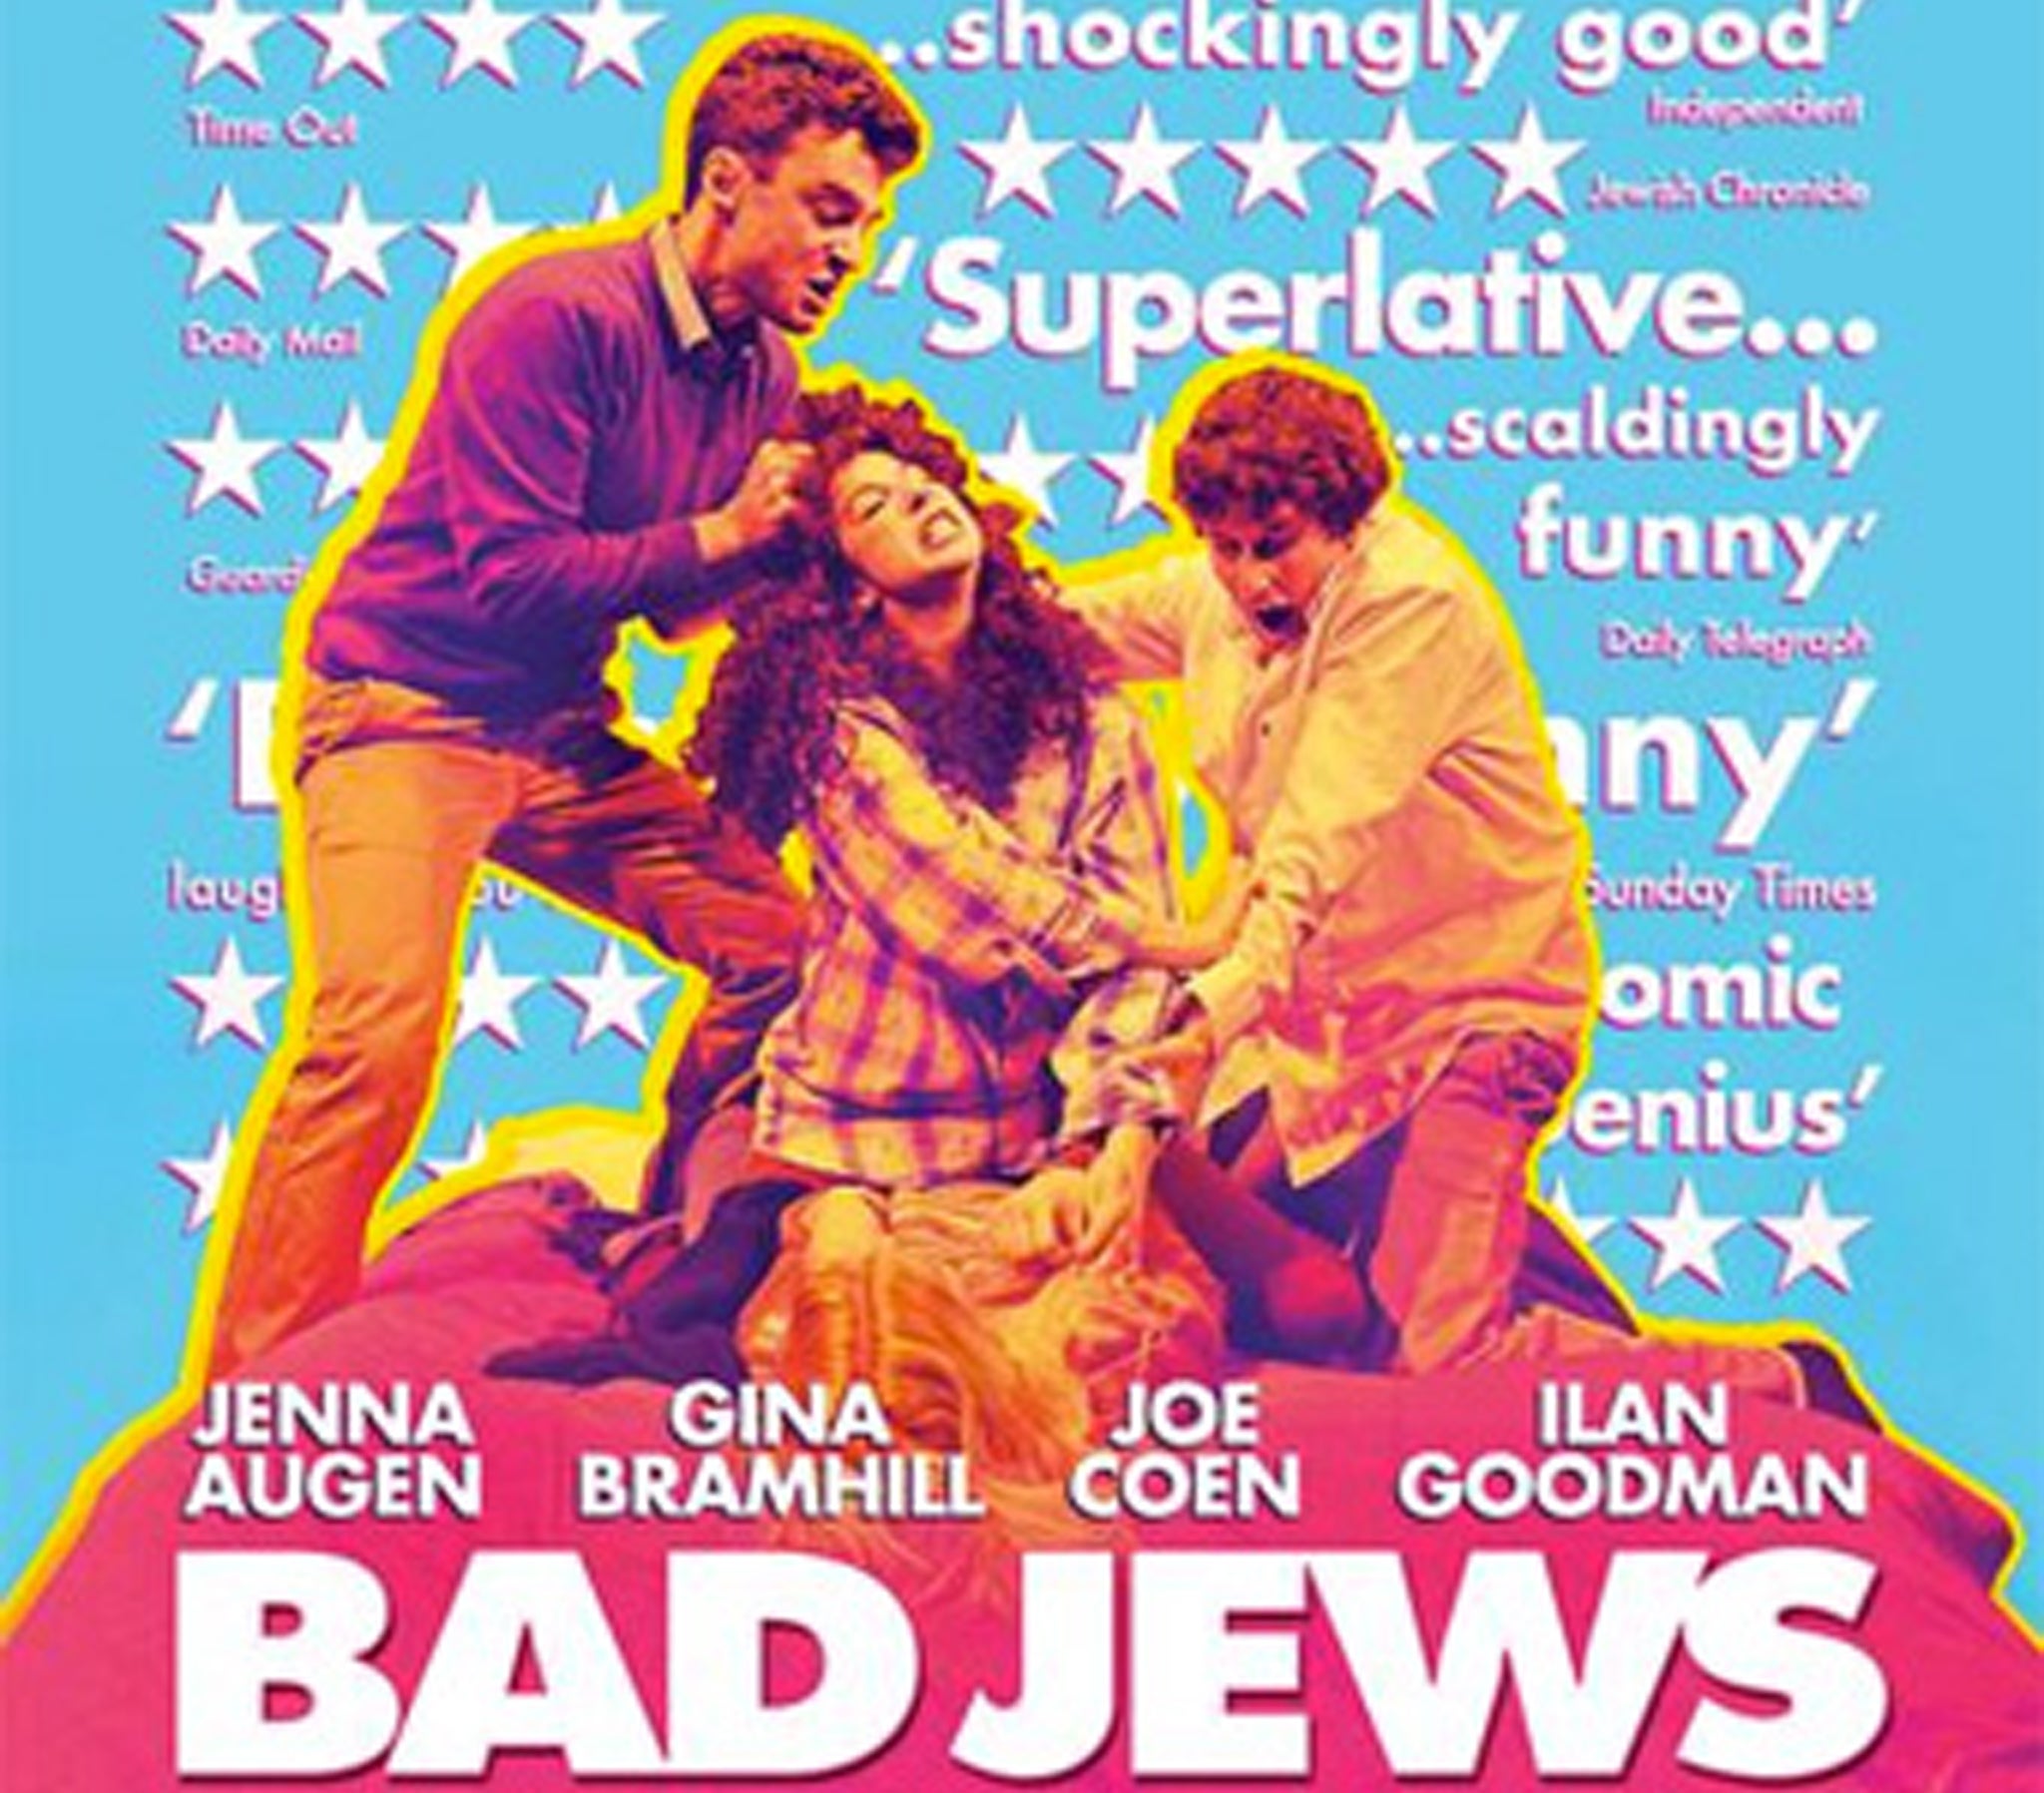 The poster for comedy Bad Jews has been banned by London Underground